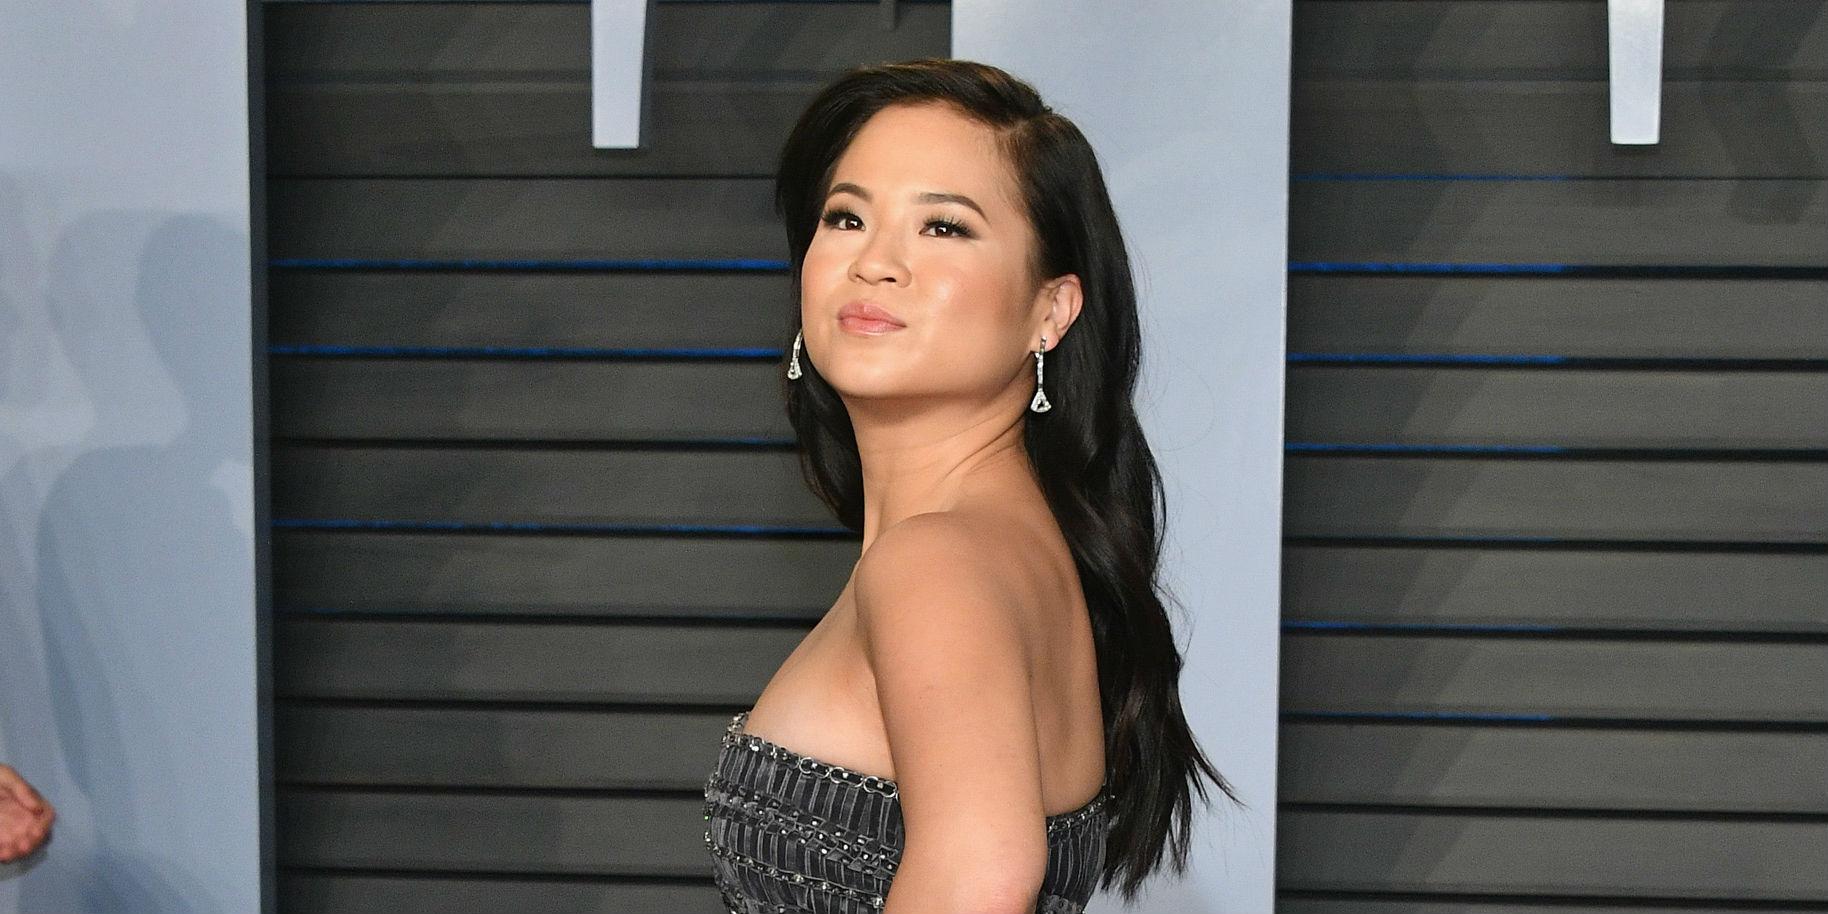 Star Wars actress Kelly Marie Tran has spoken out about online harassment f...